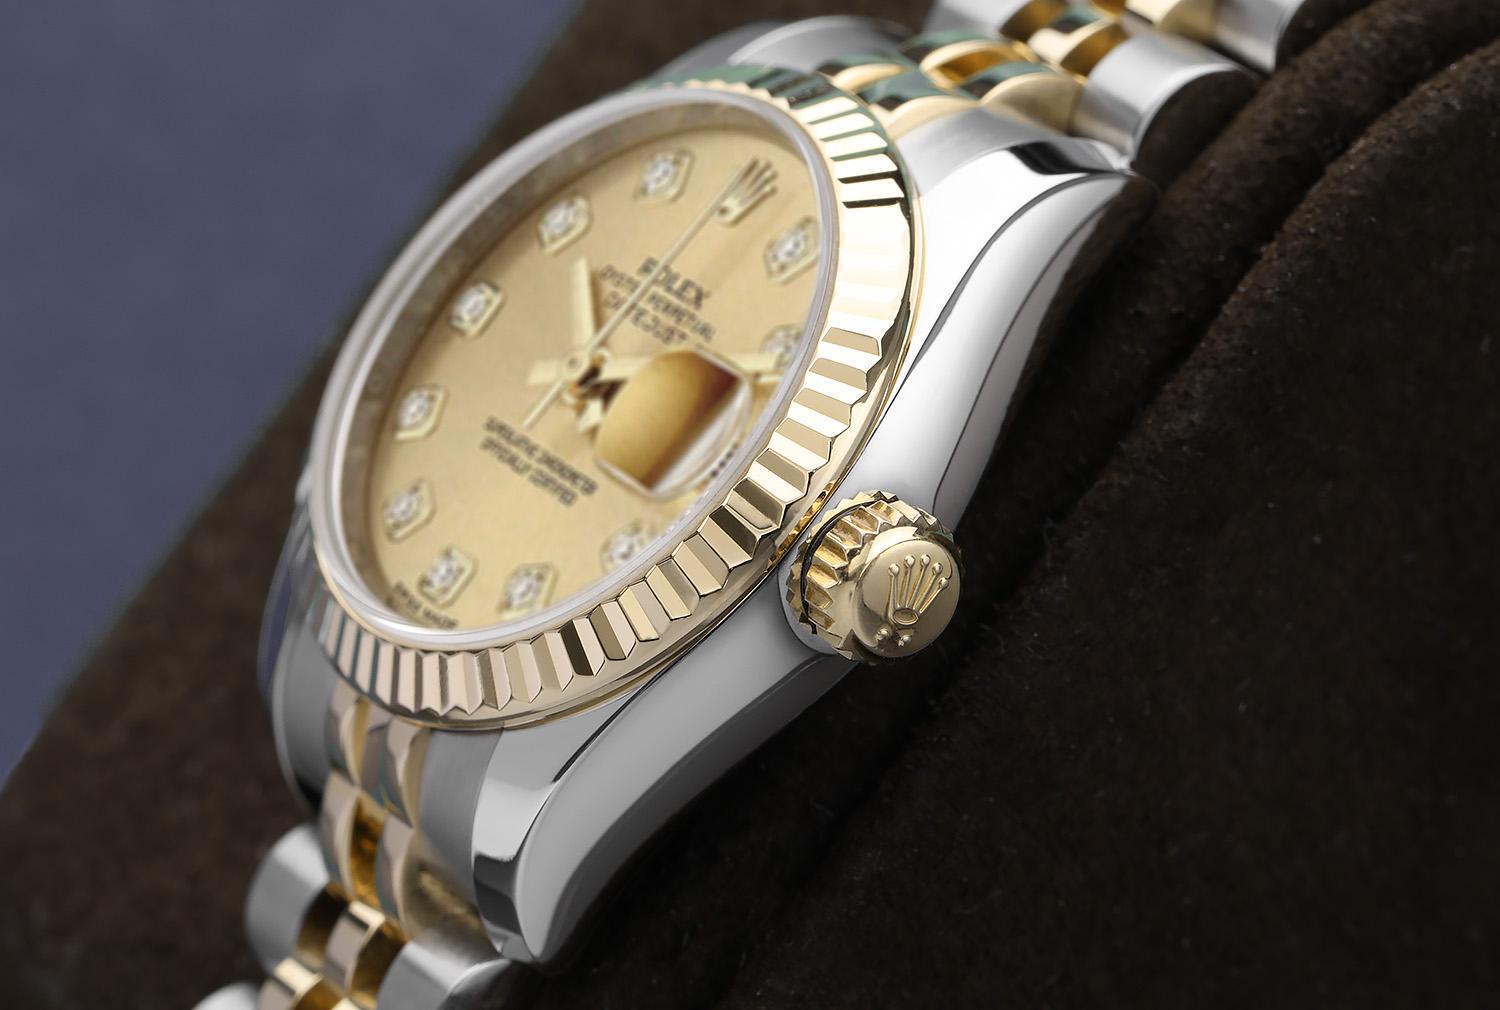 Rolex Lady-Datejust 179173 Steel/Yellow Gold Watch Champagne Diamond Dial For Sale 2